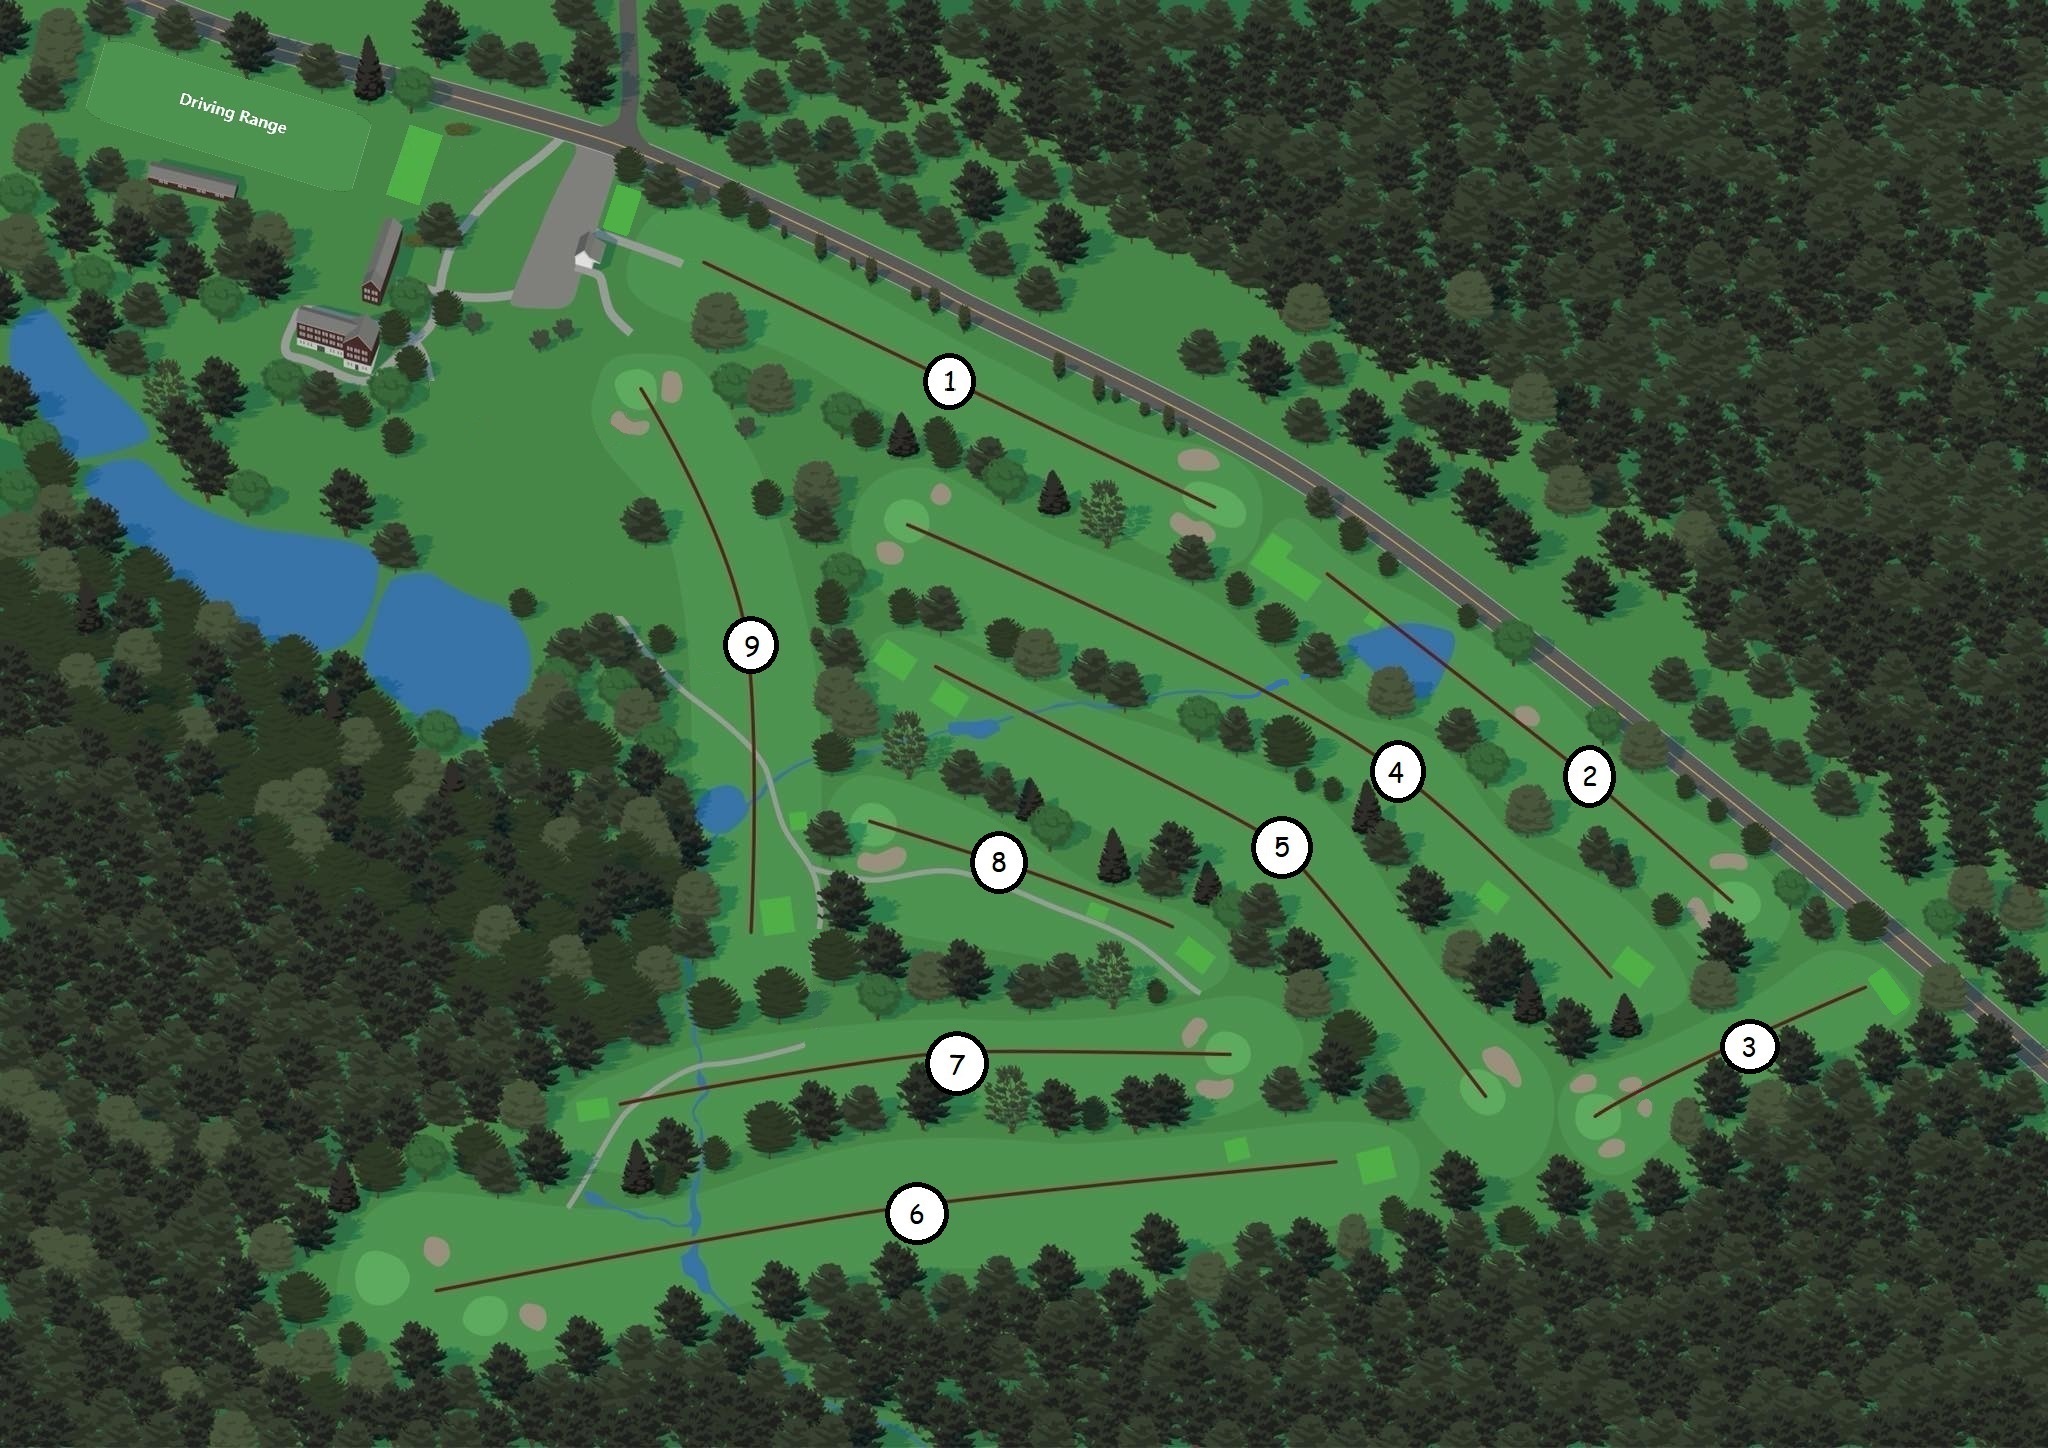 Course Map Modifed with numbers